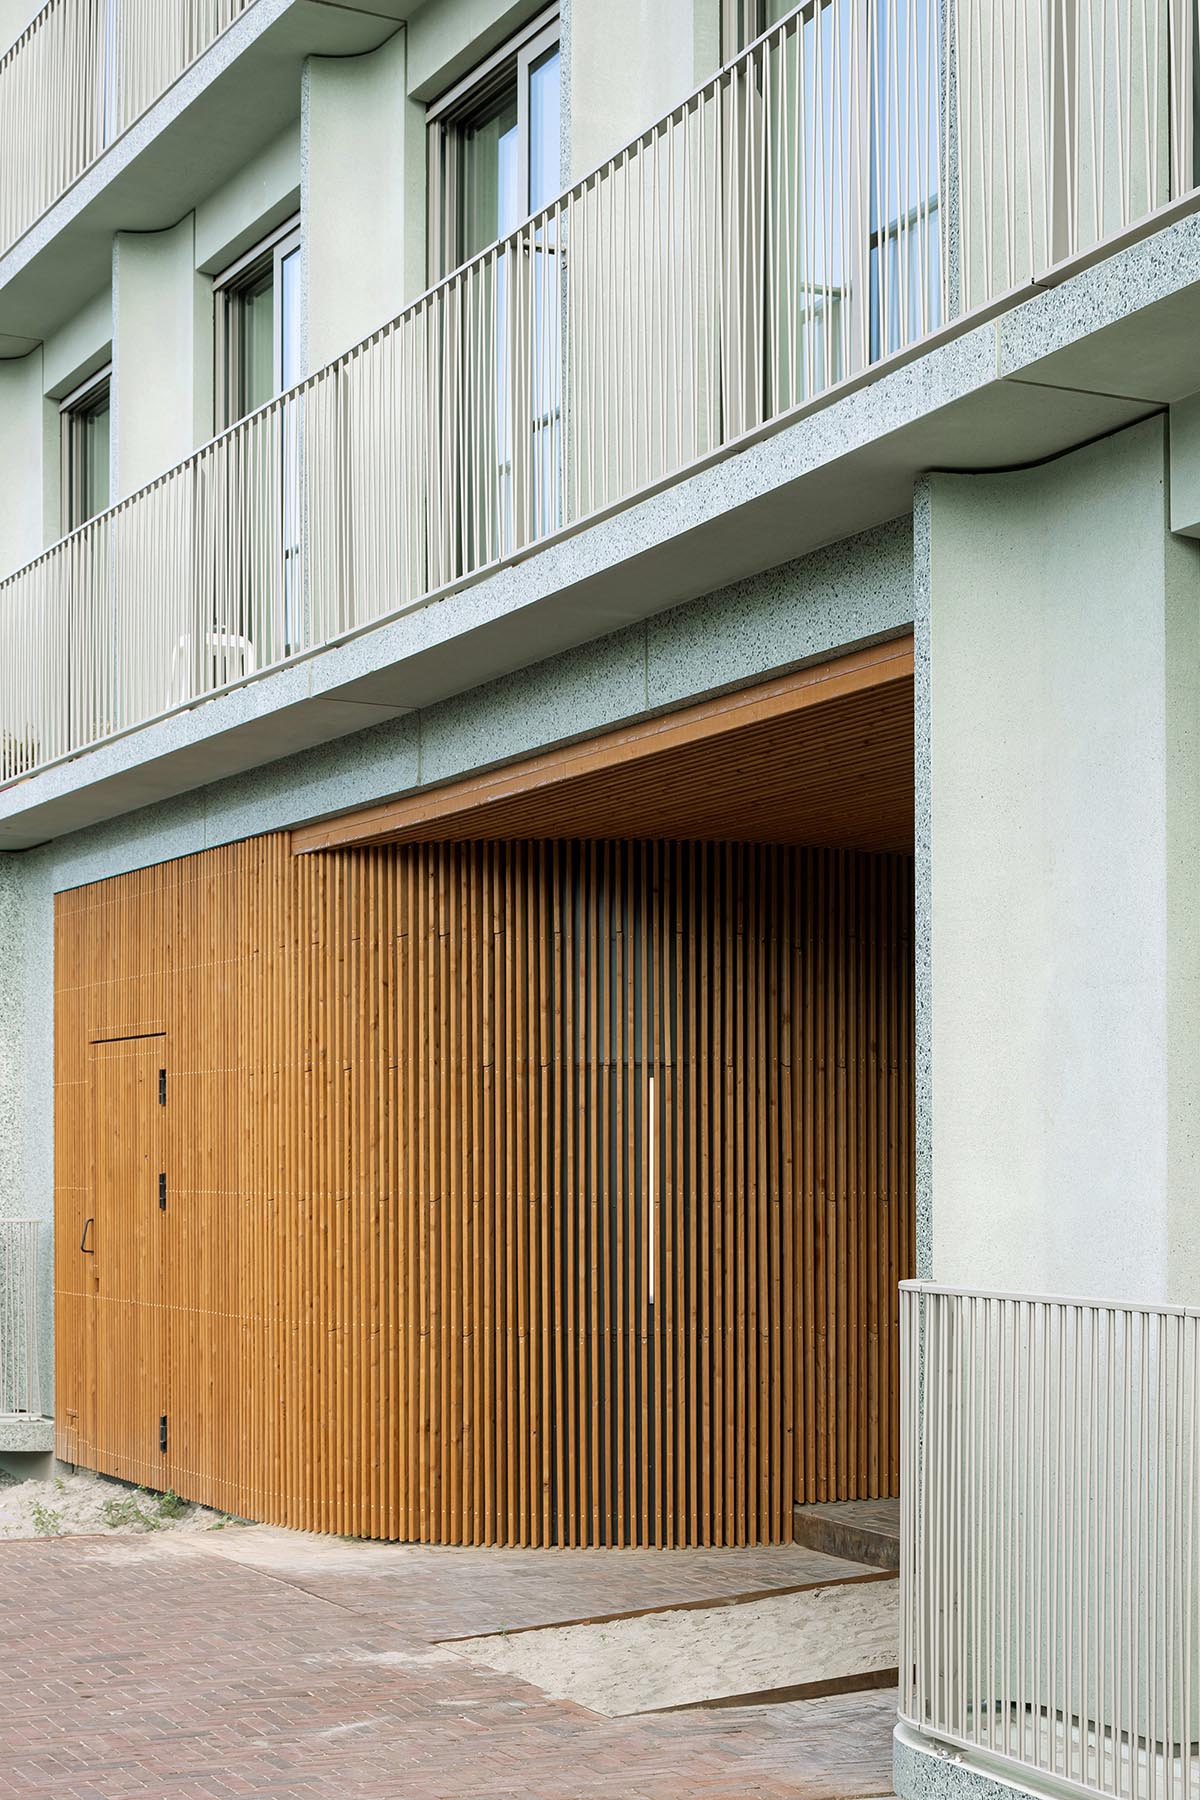 Studioninedots completes social housing featuring staggered balconies in Amsterdam waterfront